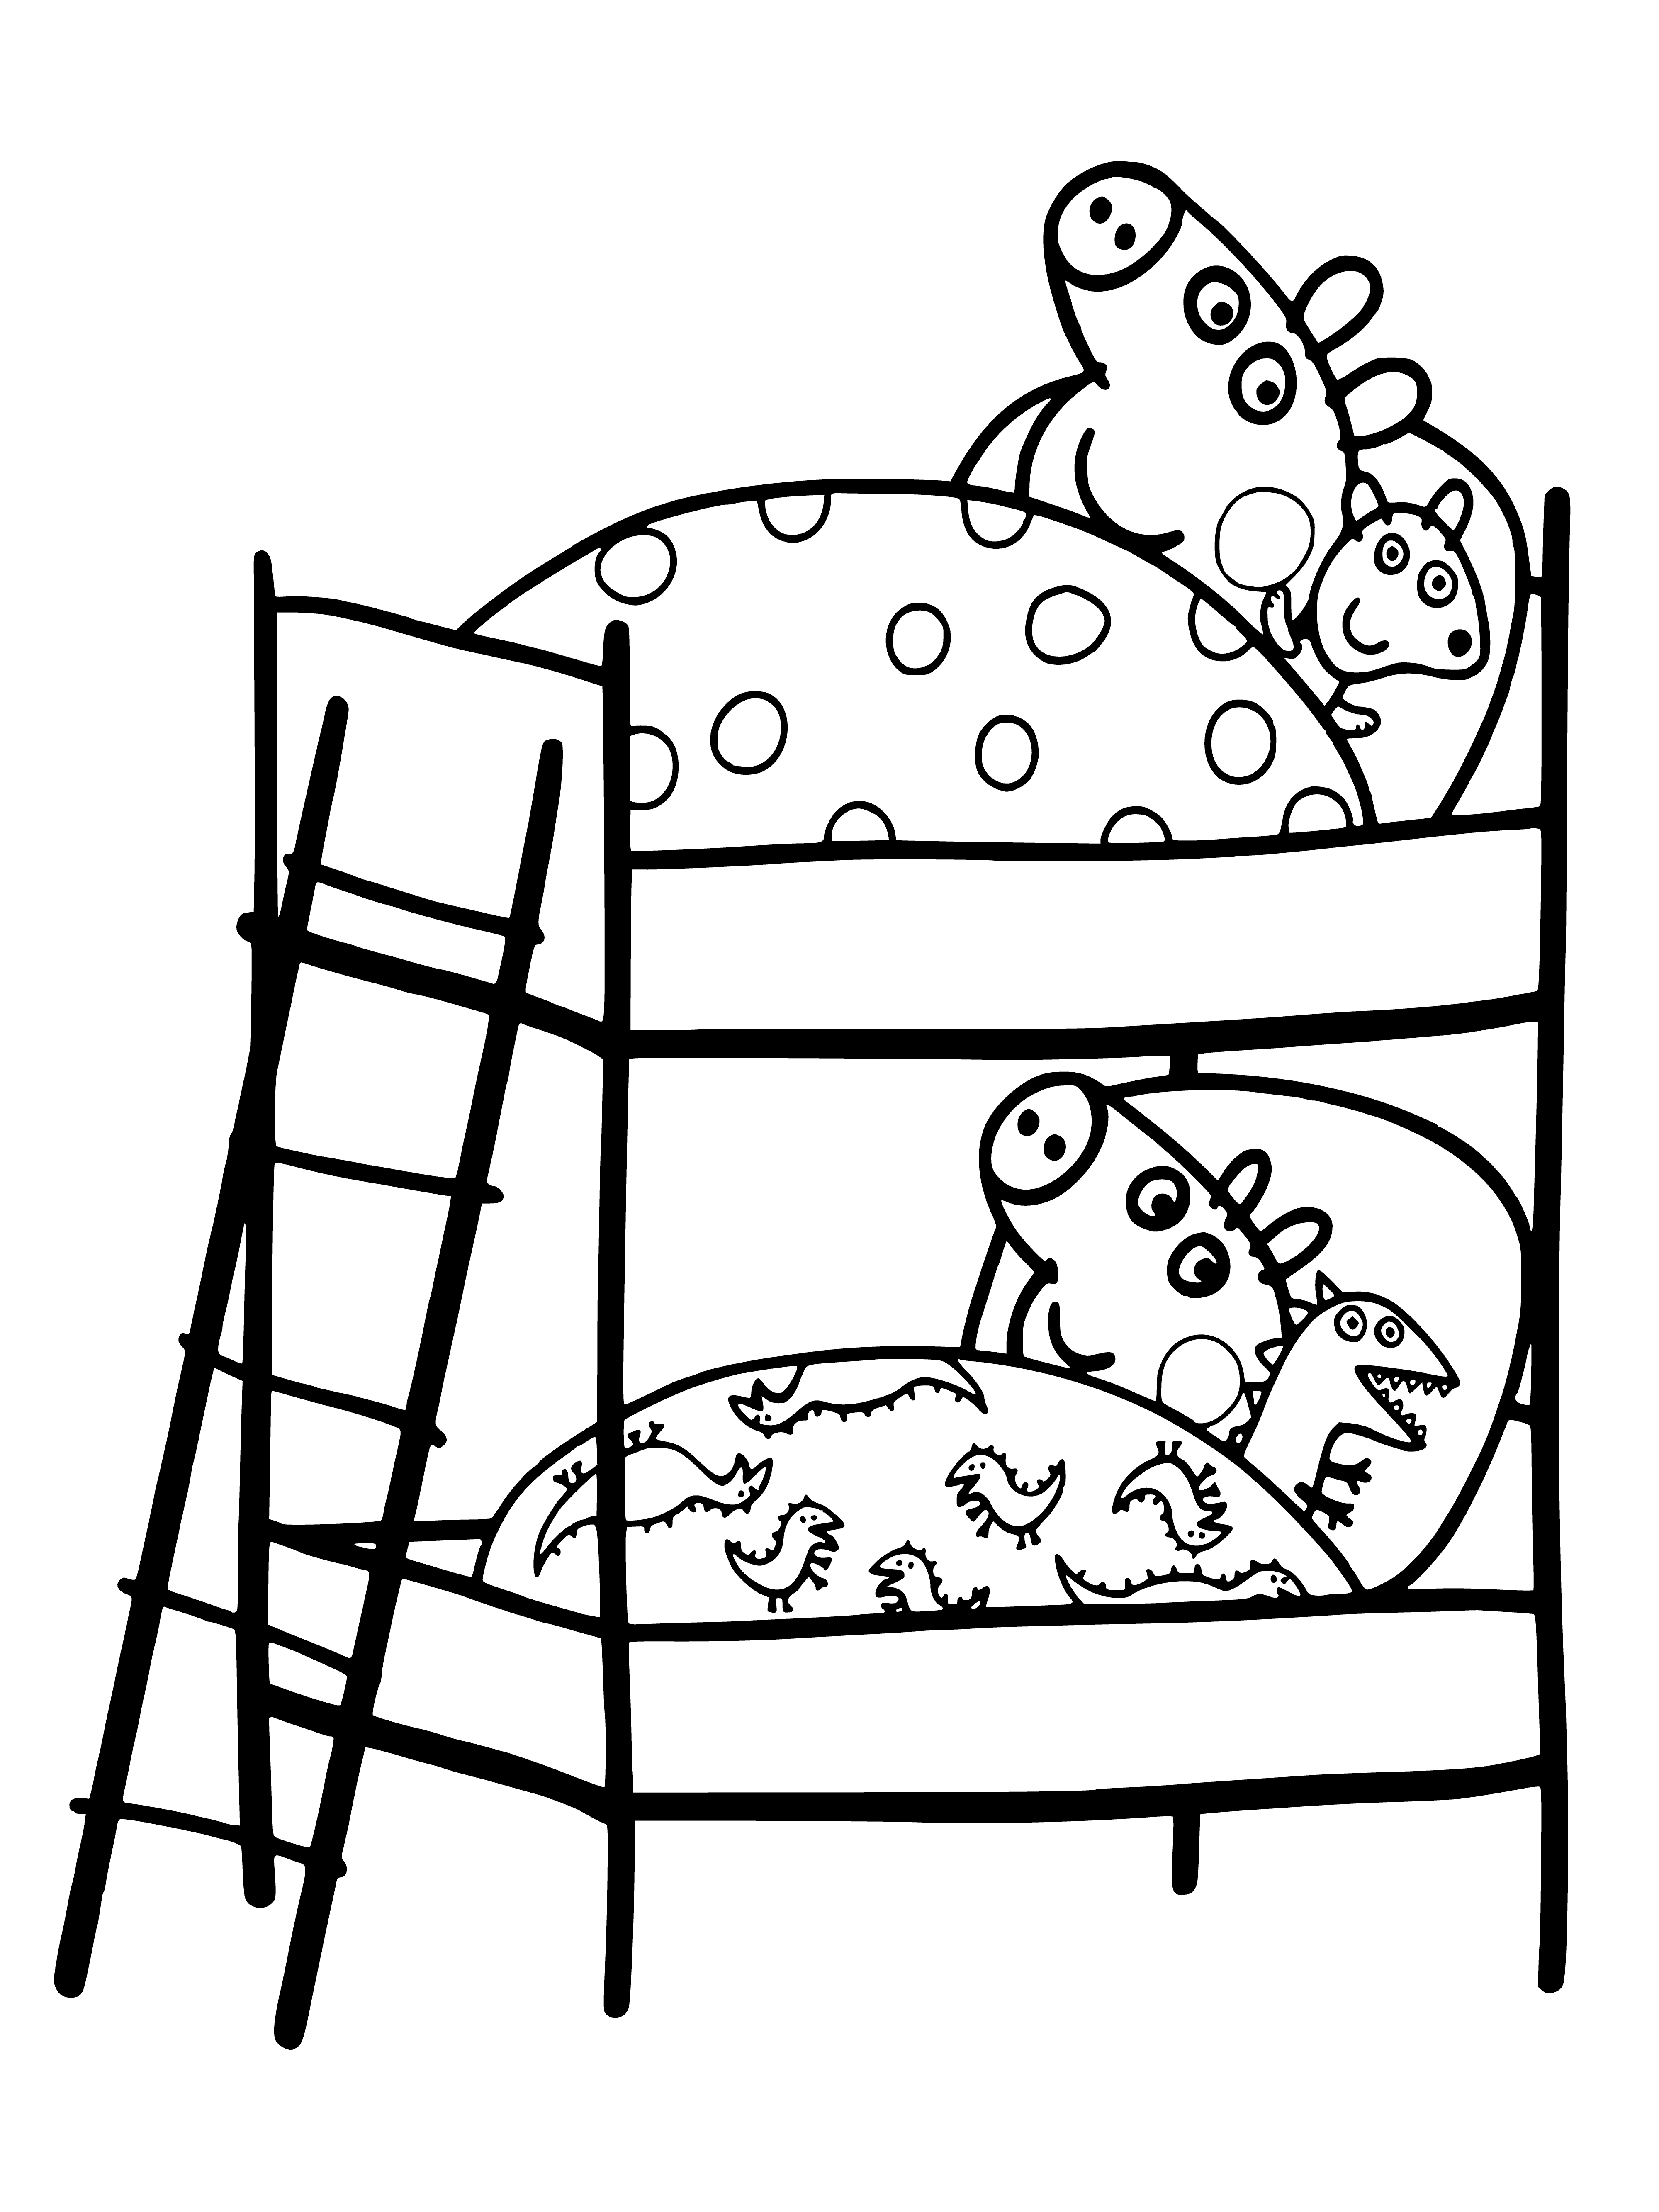 George and Peppa in beds coloring page